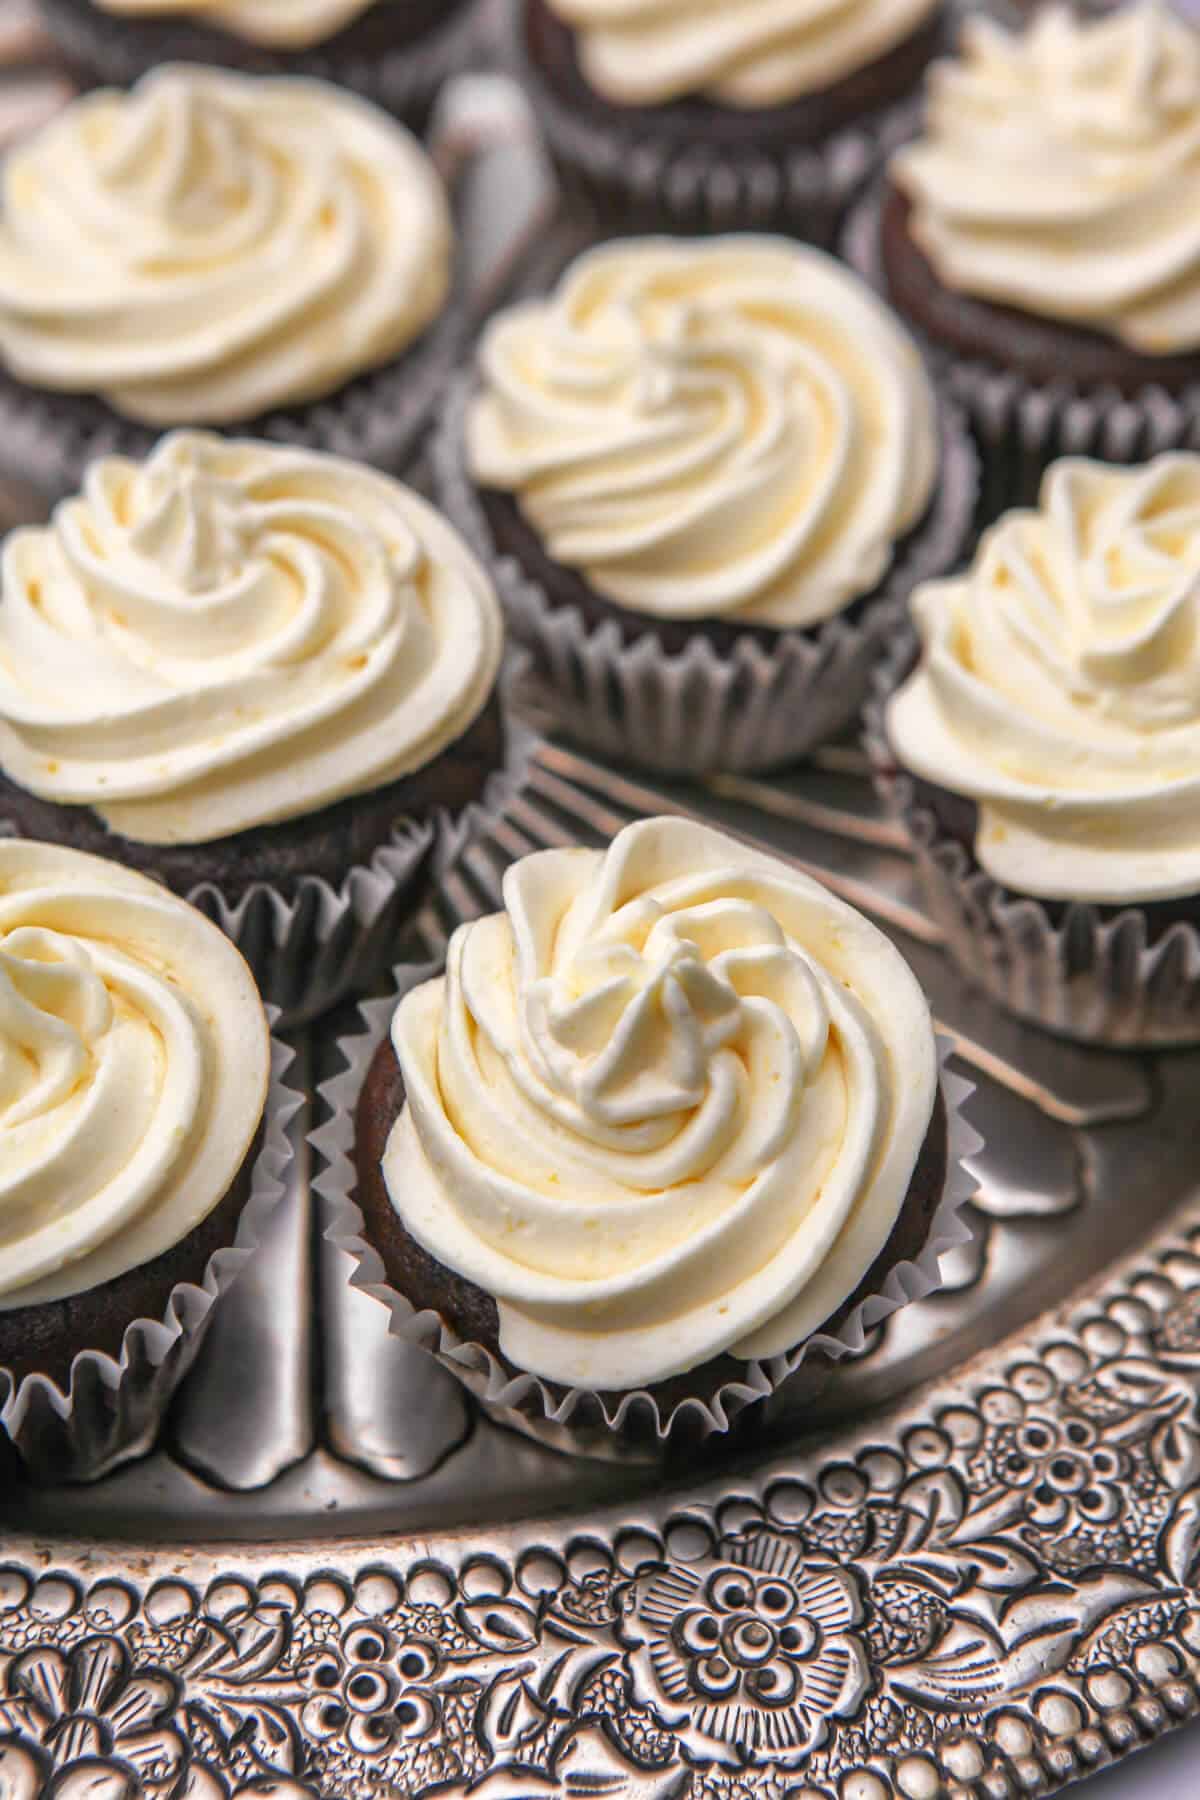 Vegan gingerbread cupcakes with lemon frosting on a silver serving tray.